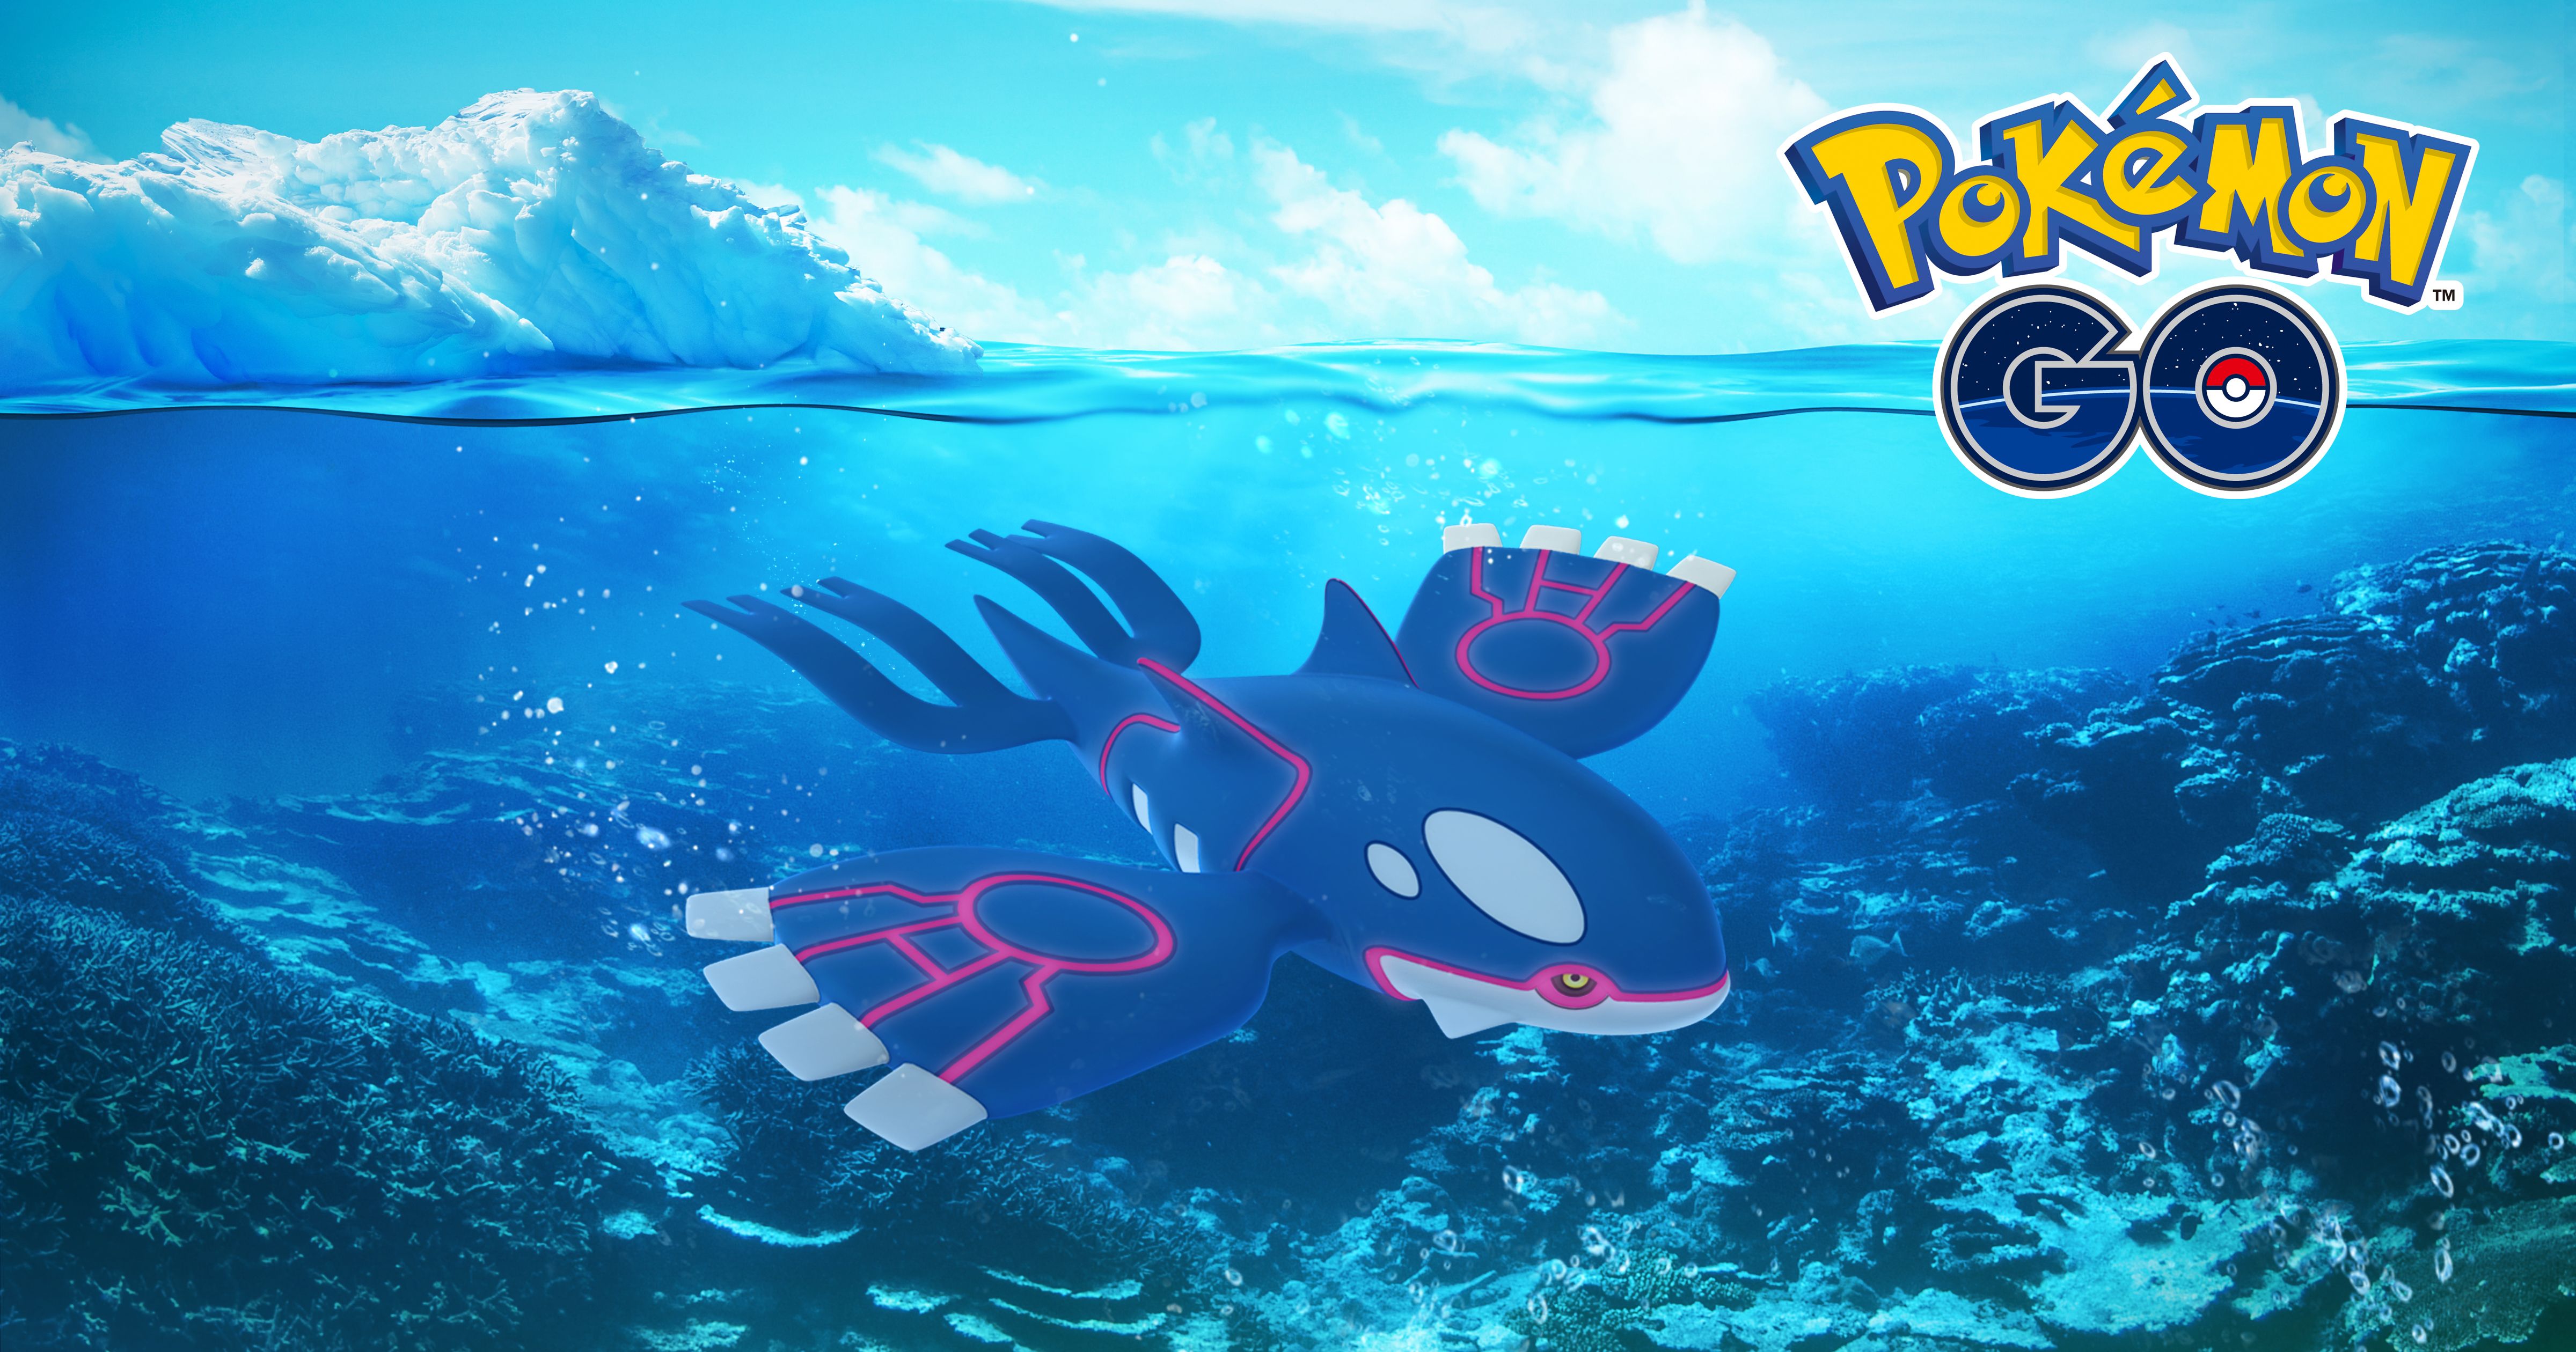 Pokemon Go Brings Two Events in January: Community Day and Legendary Kyogre